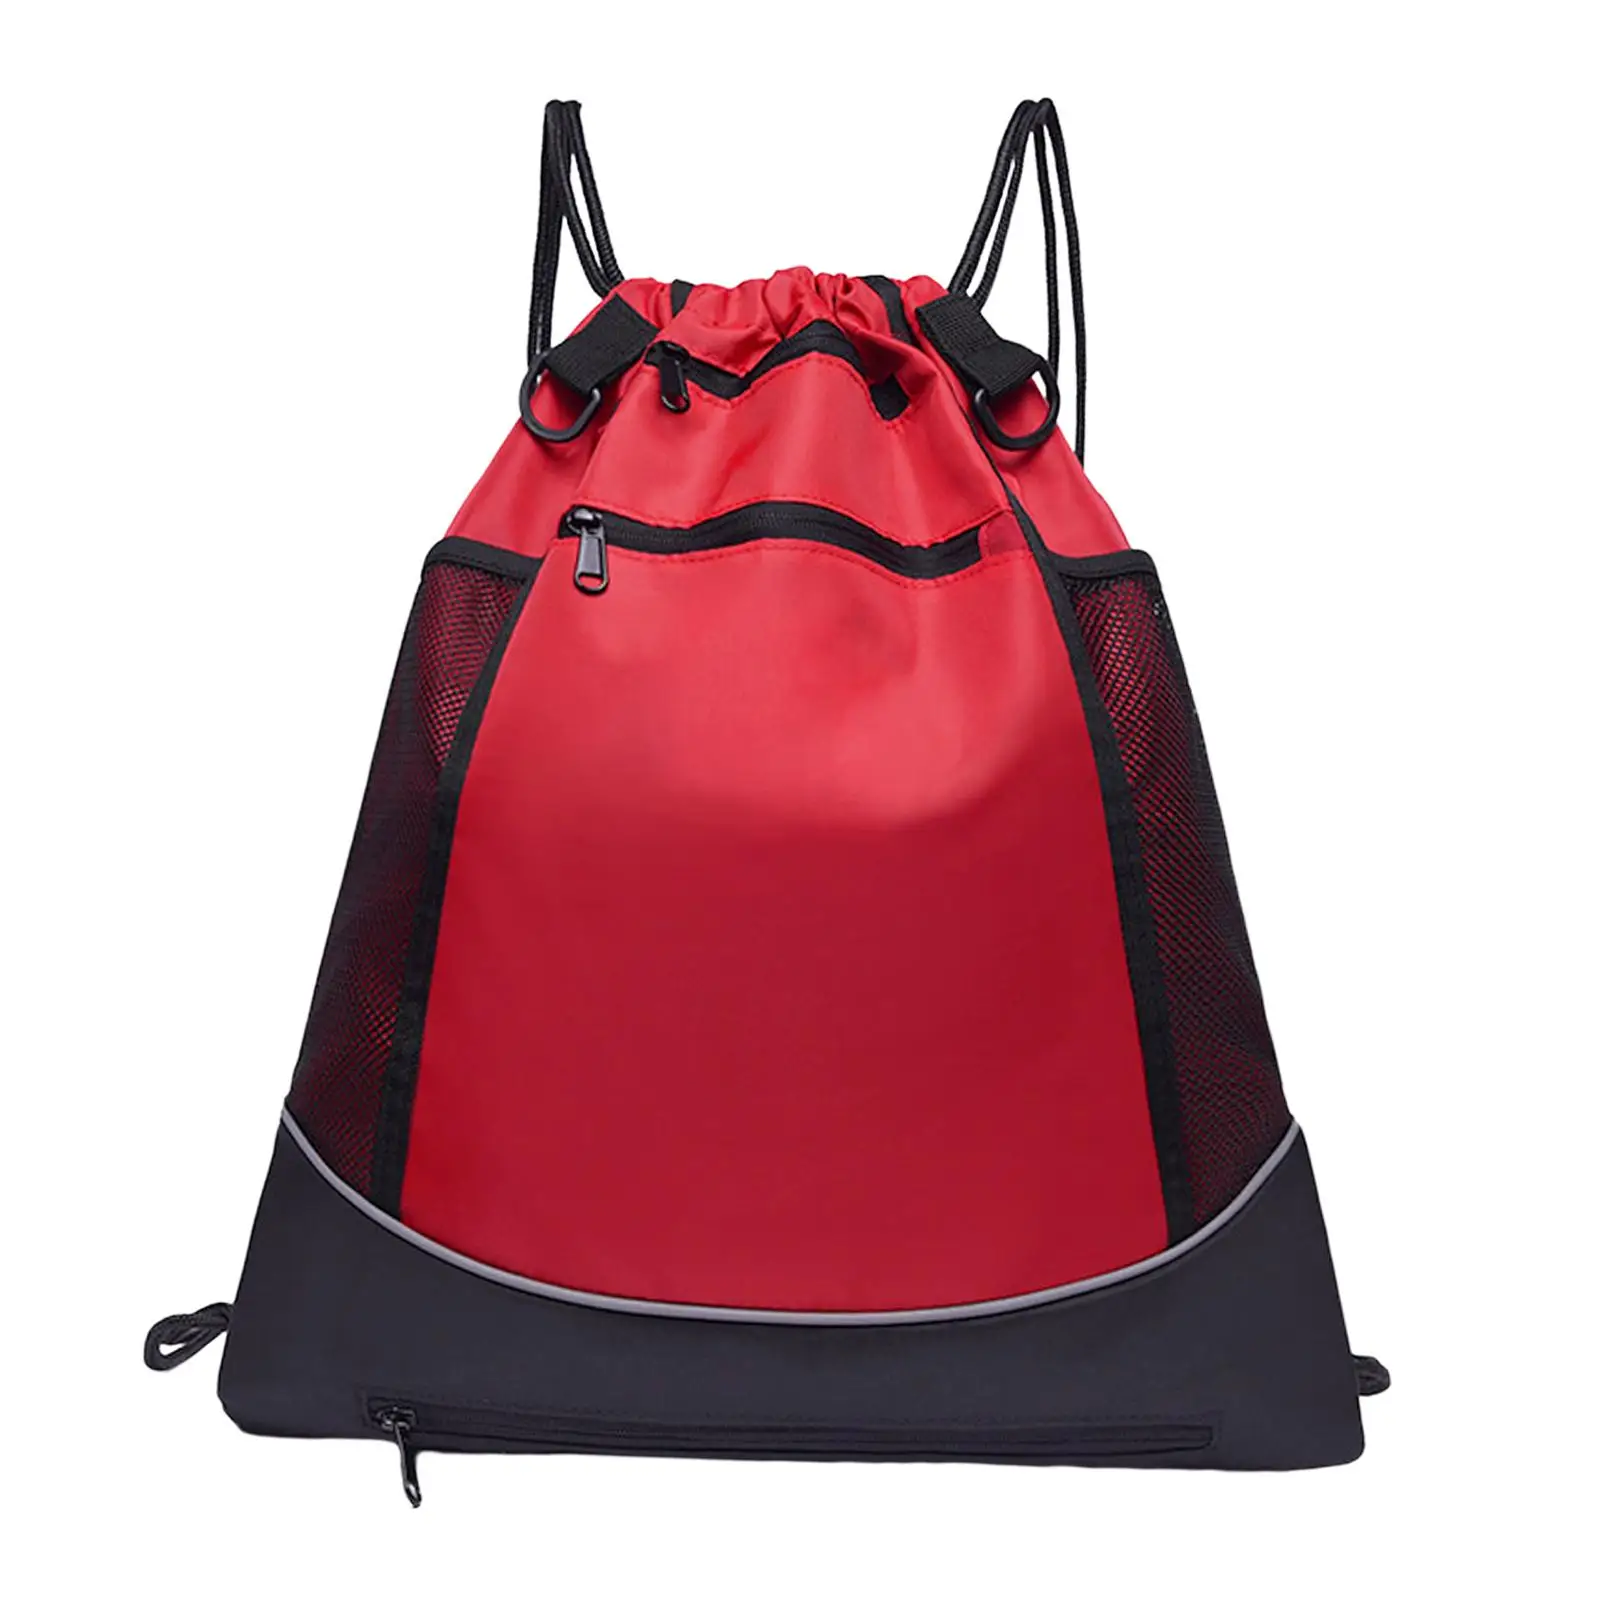 Basketball Bag Backpack with Ball Compartment, Unisex Waterproof Sports Bags for Football Soccer Volleyball Gym Team